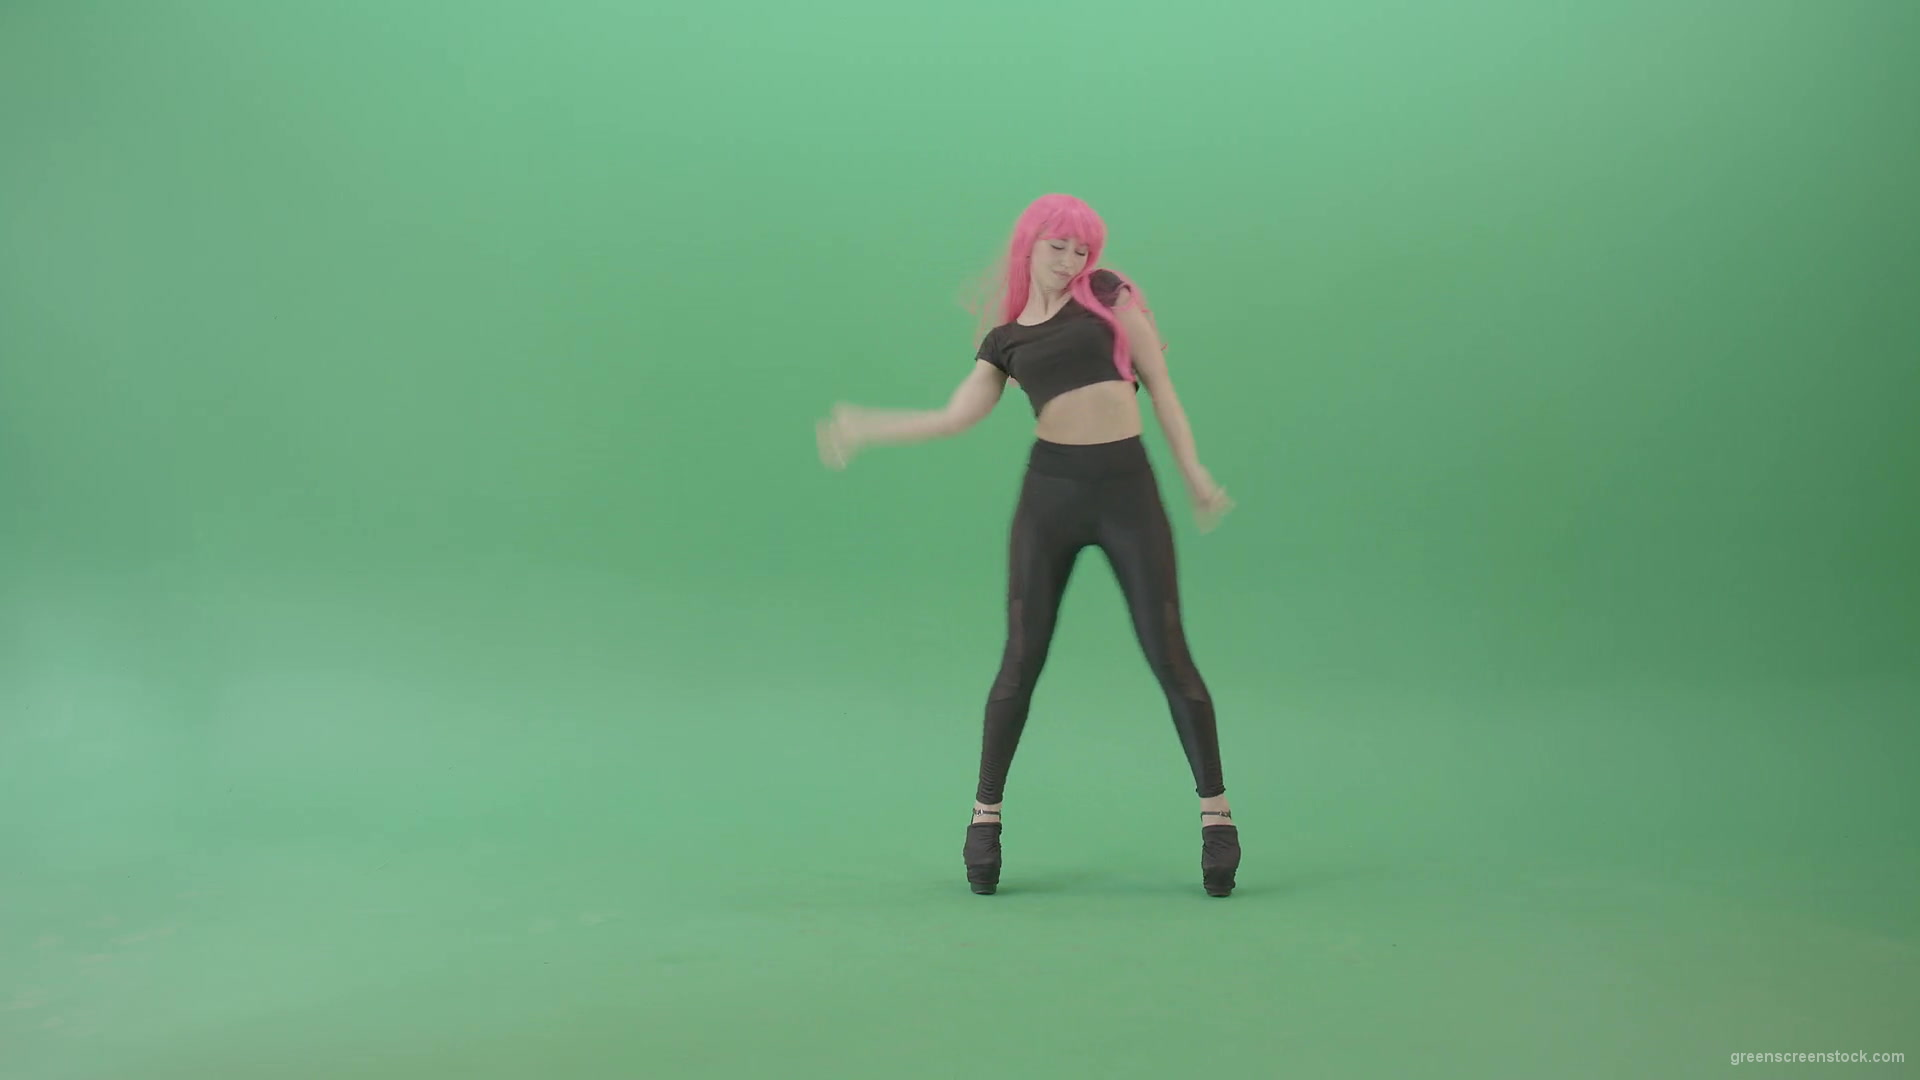 Pink-hair-girl-showing-sexy-moves-dancing-strip-on-green-screen-4K-Video-Footage-1920_006 Green Screen Stock